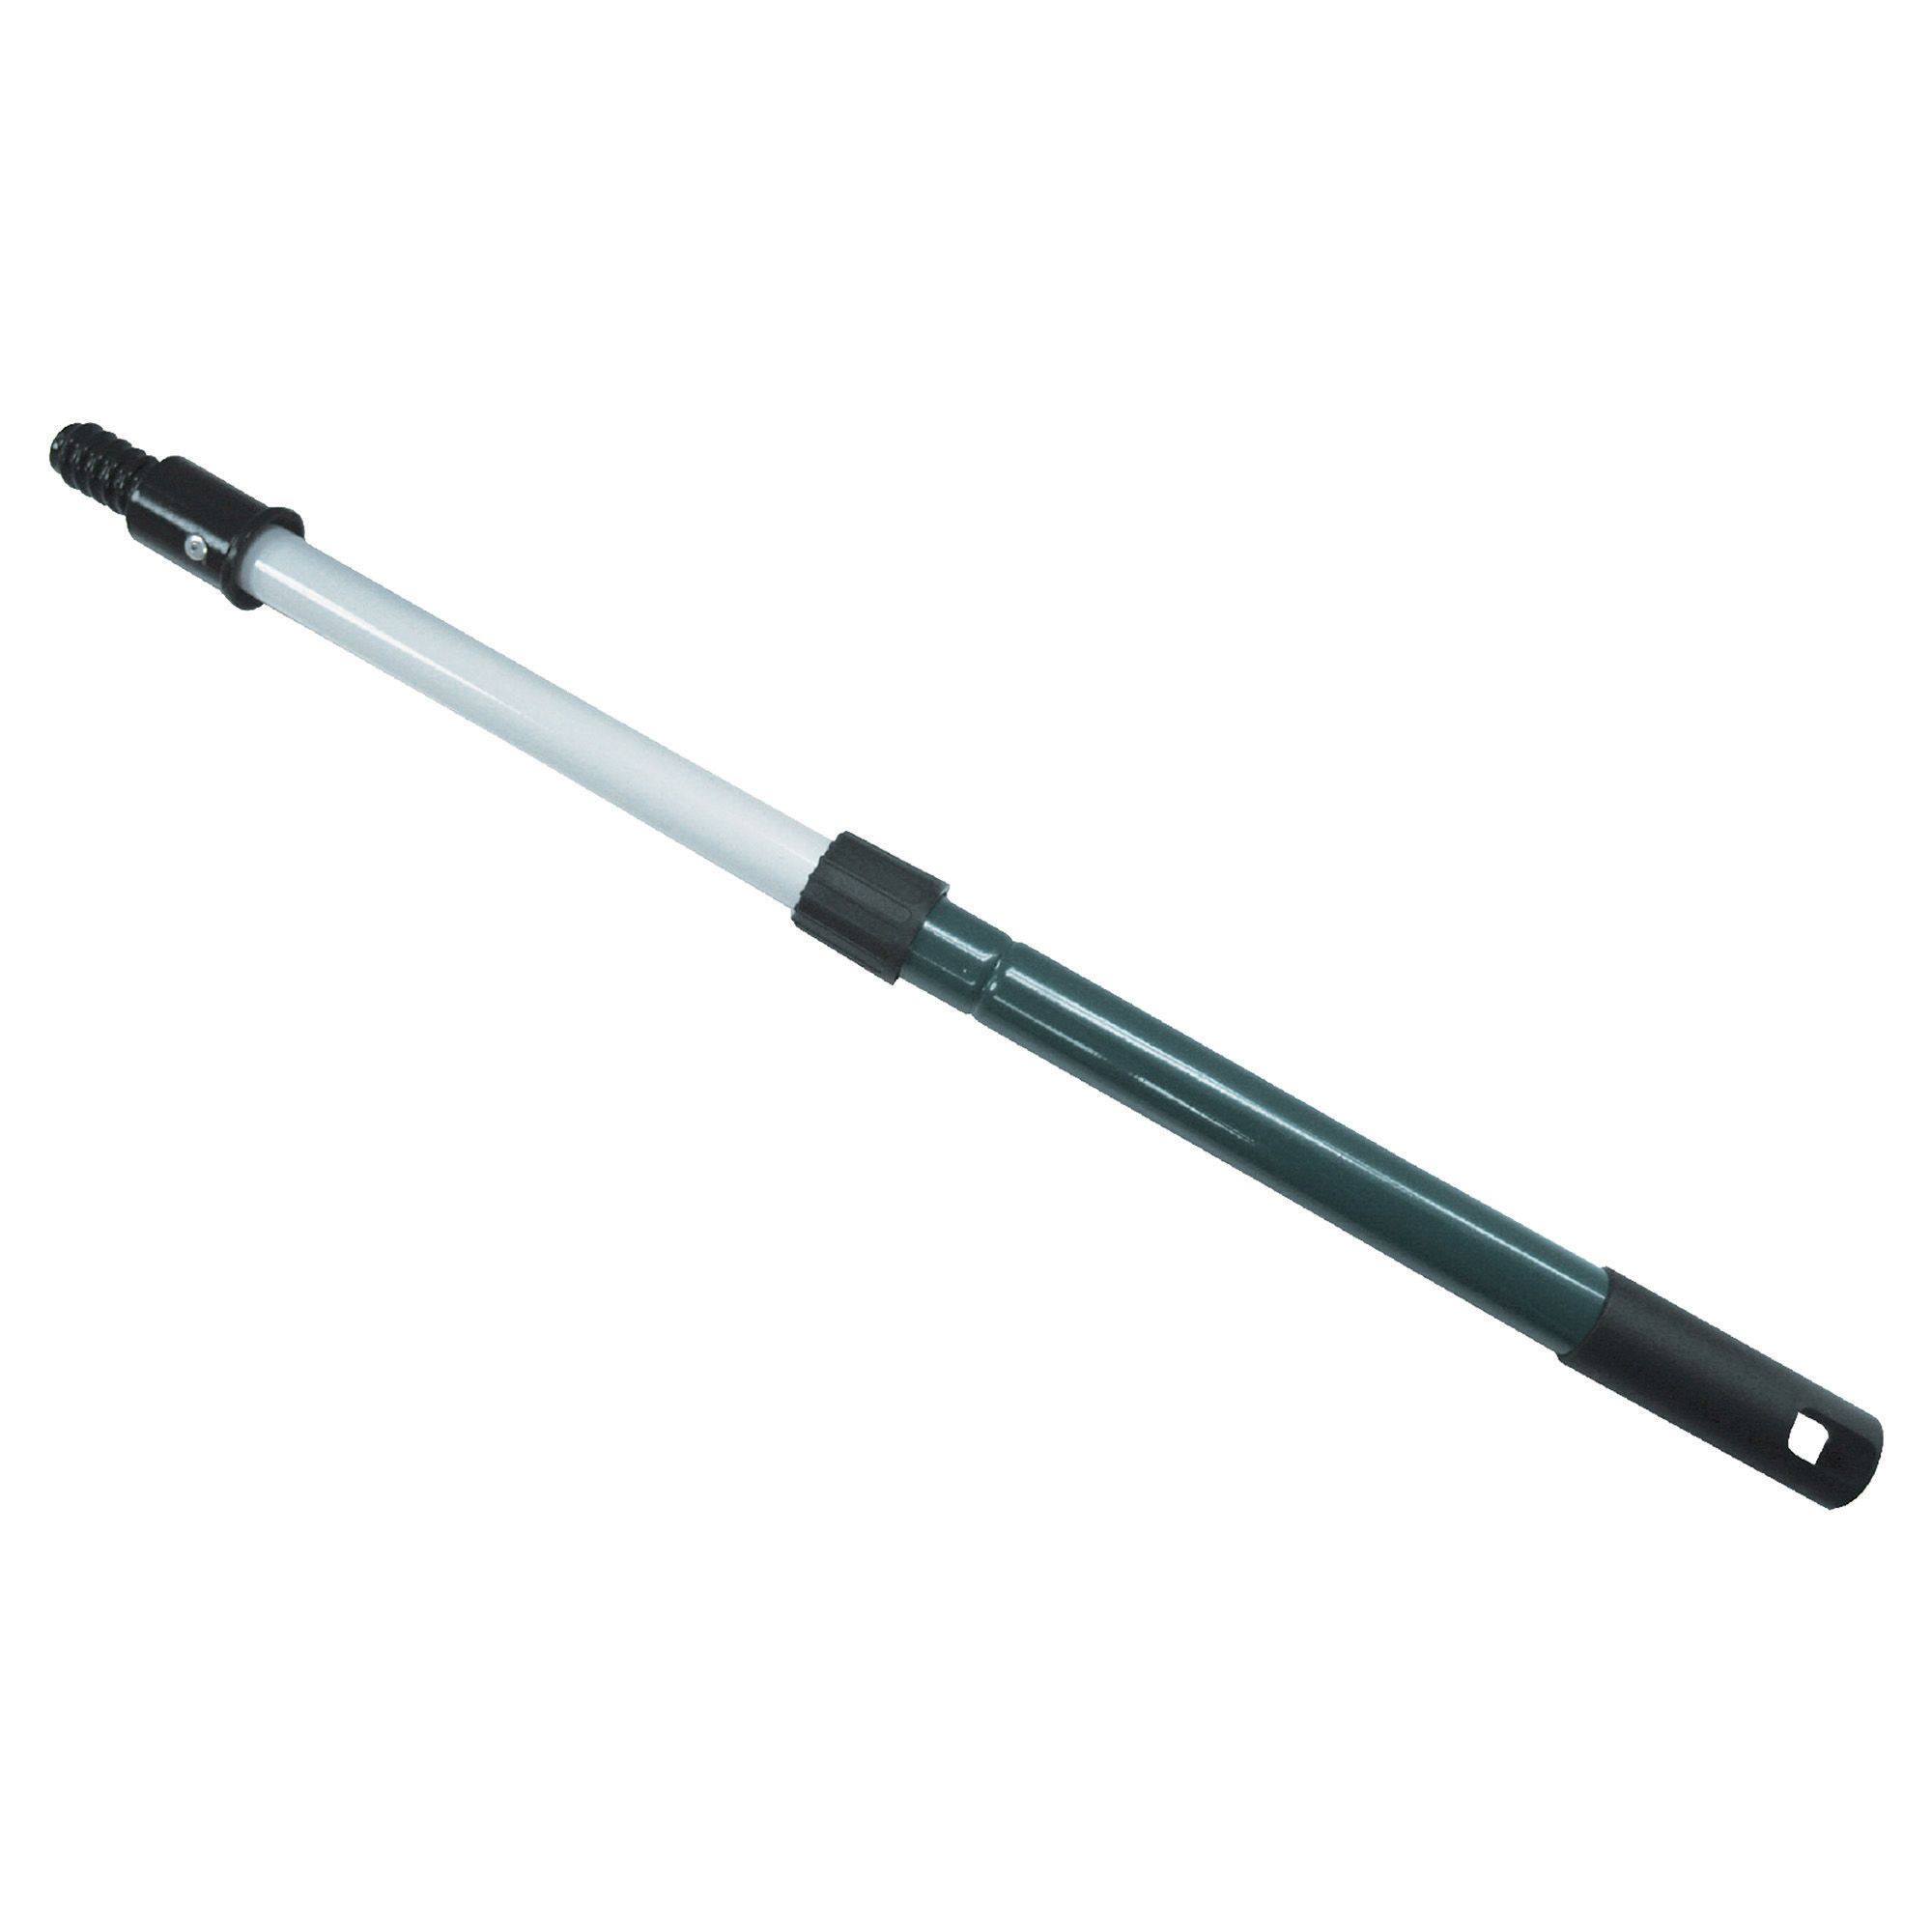 Telescopic Extension Pole - 4' to 8' - Steel from RICHARD